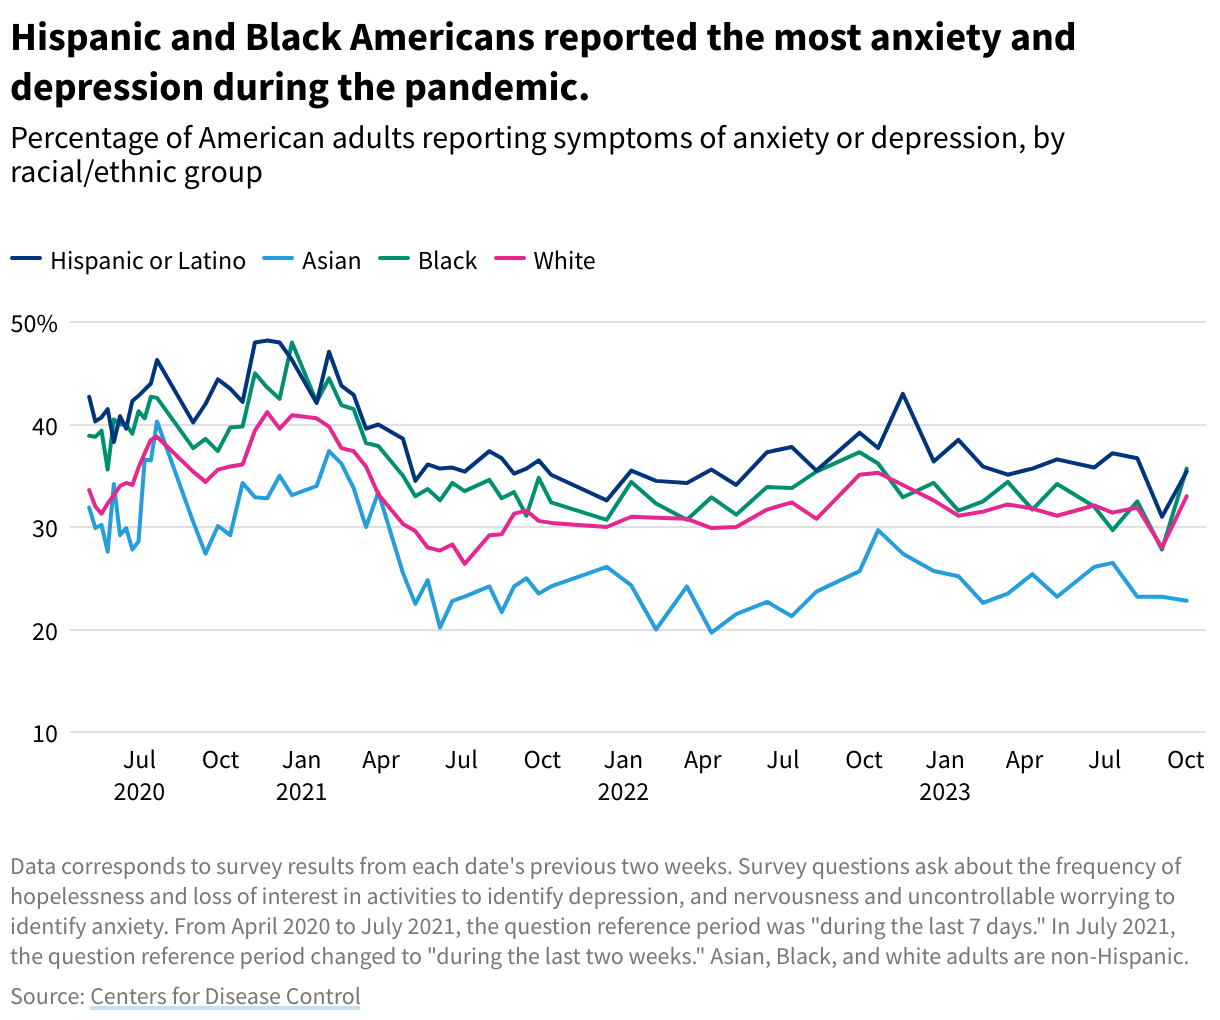 Line chart showing that Hispanic/Latino Americans had the highest rates of anxiety/depression, followed by Black, then white, then Asian Americans.